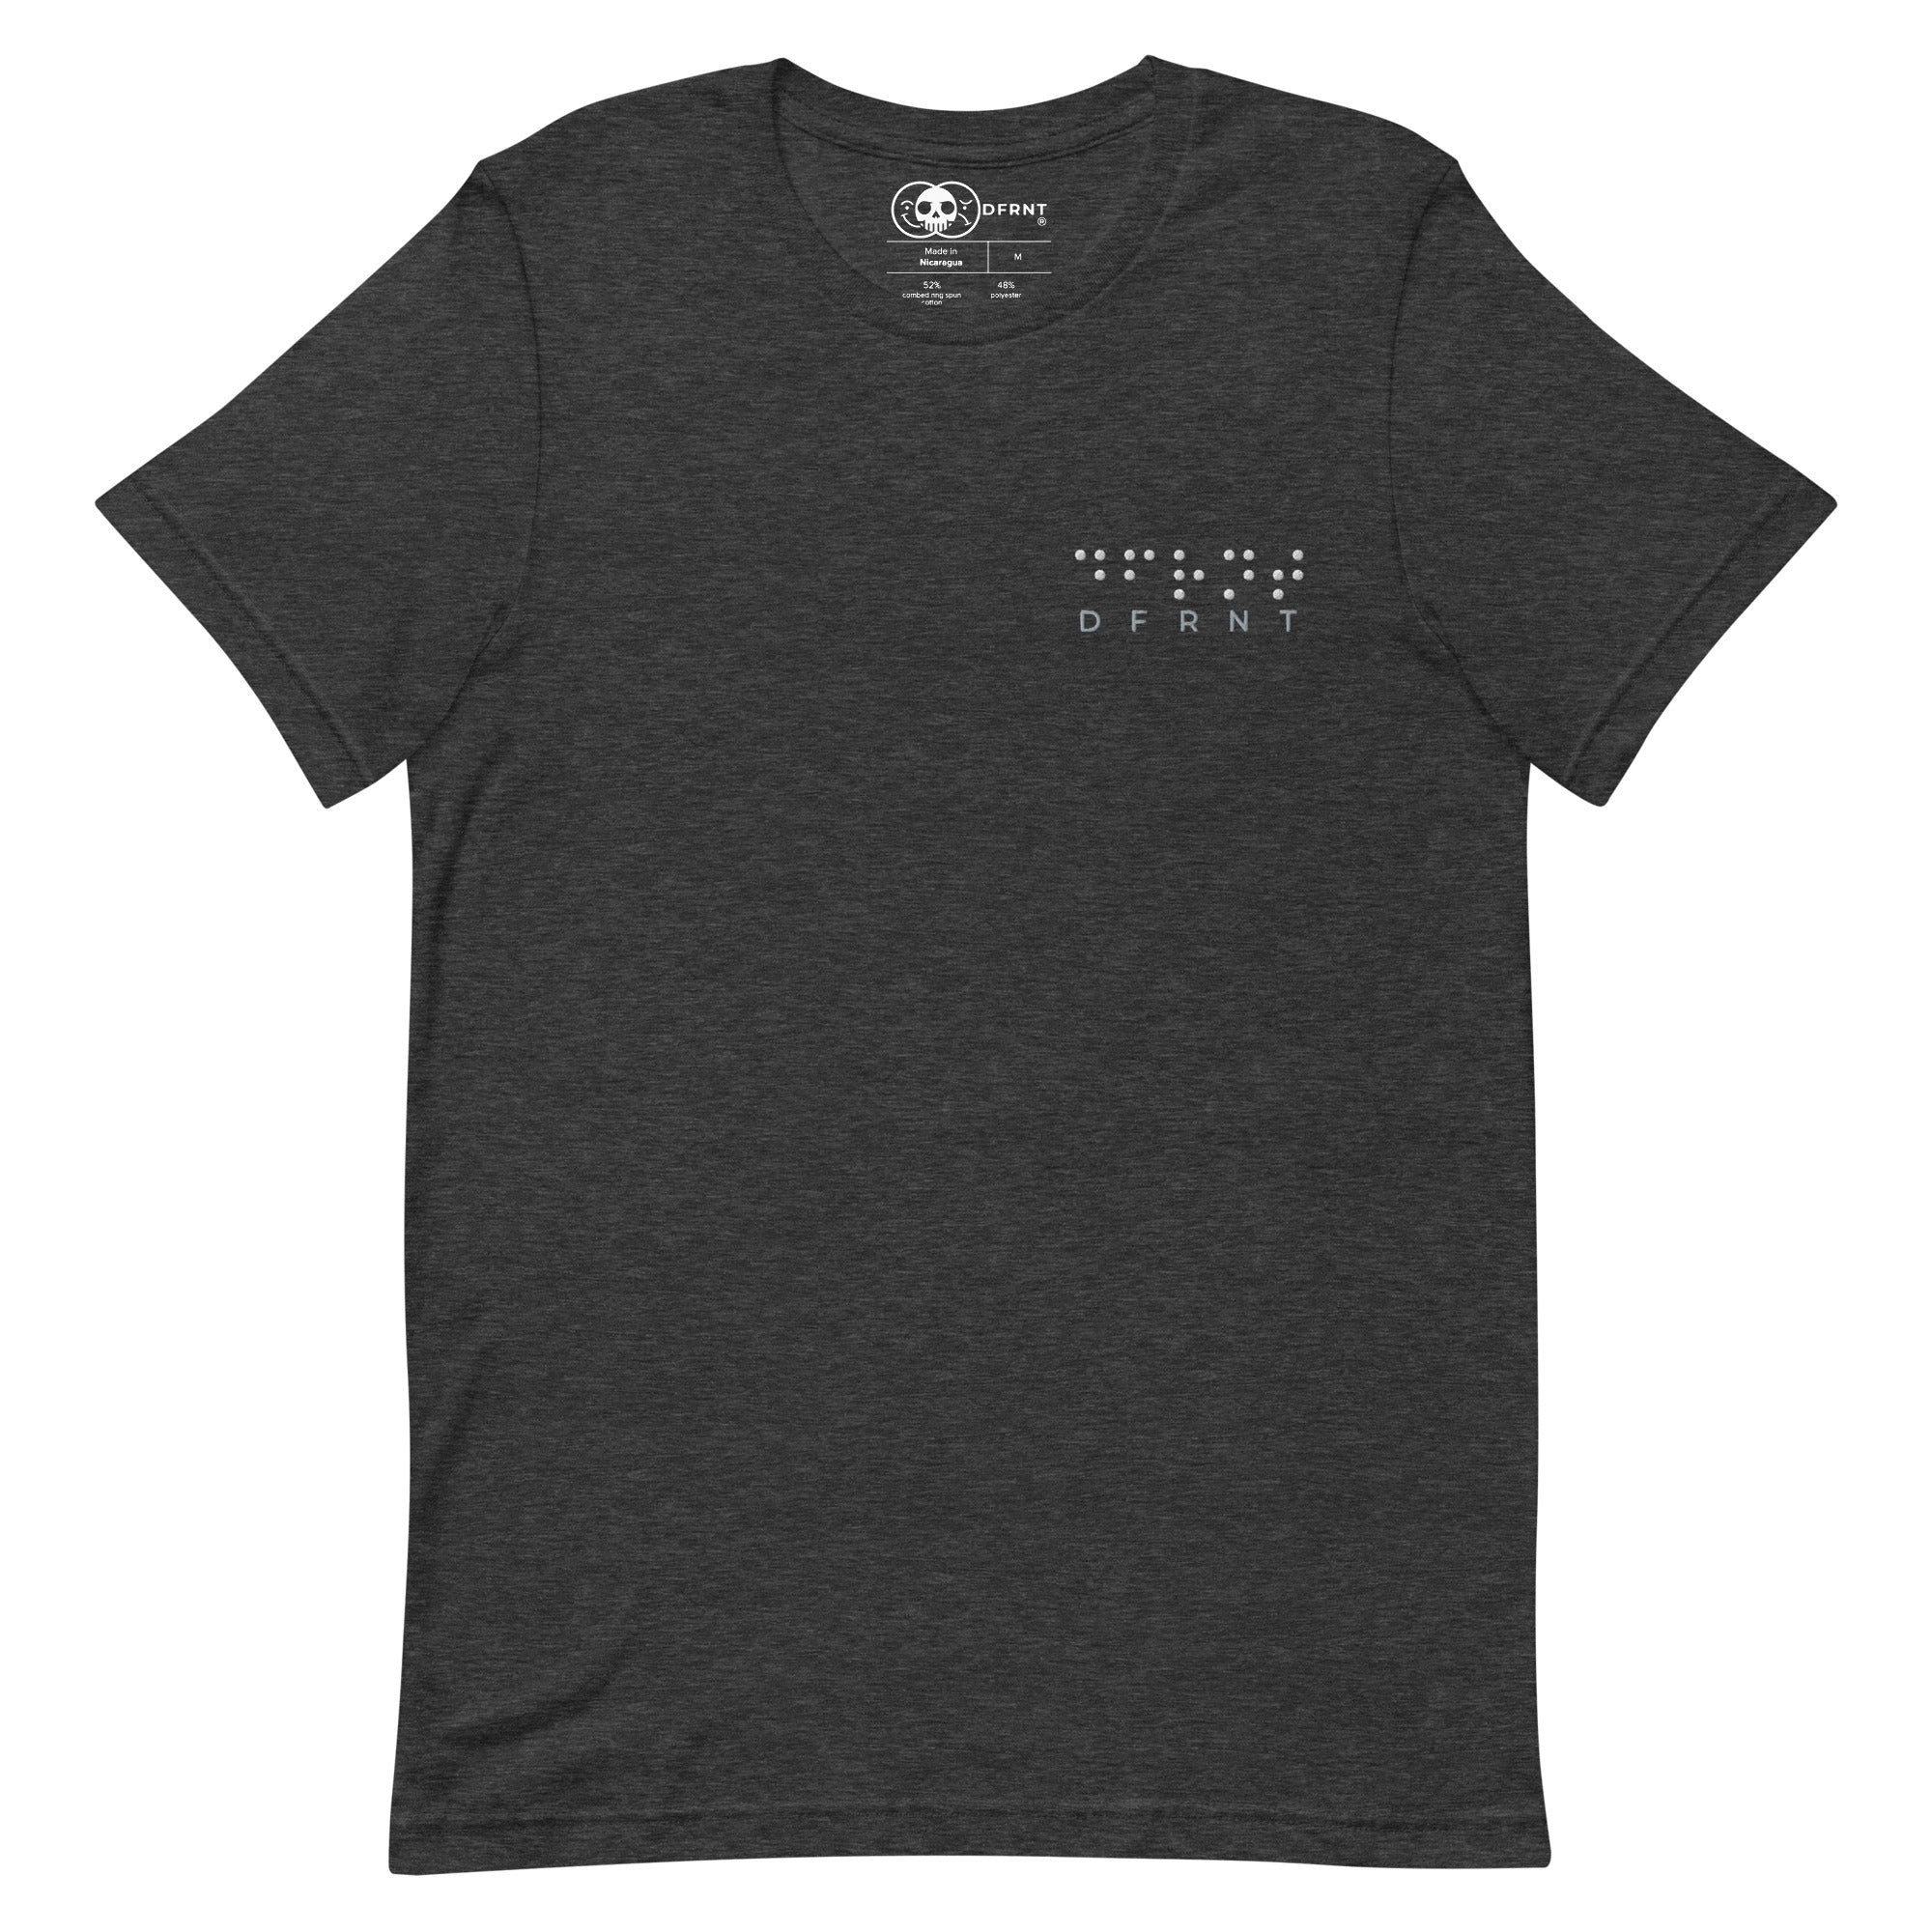 DFRNT BRAILLE | embroidered t-shirt